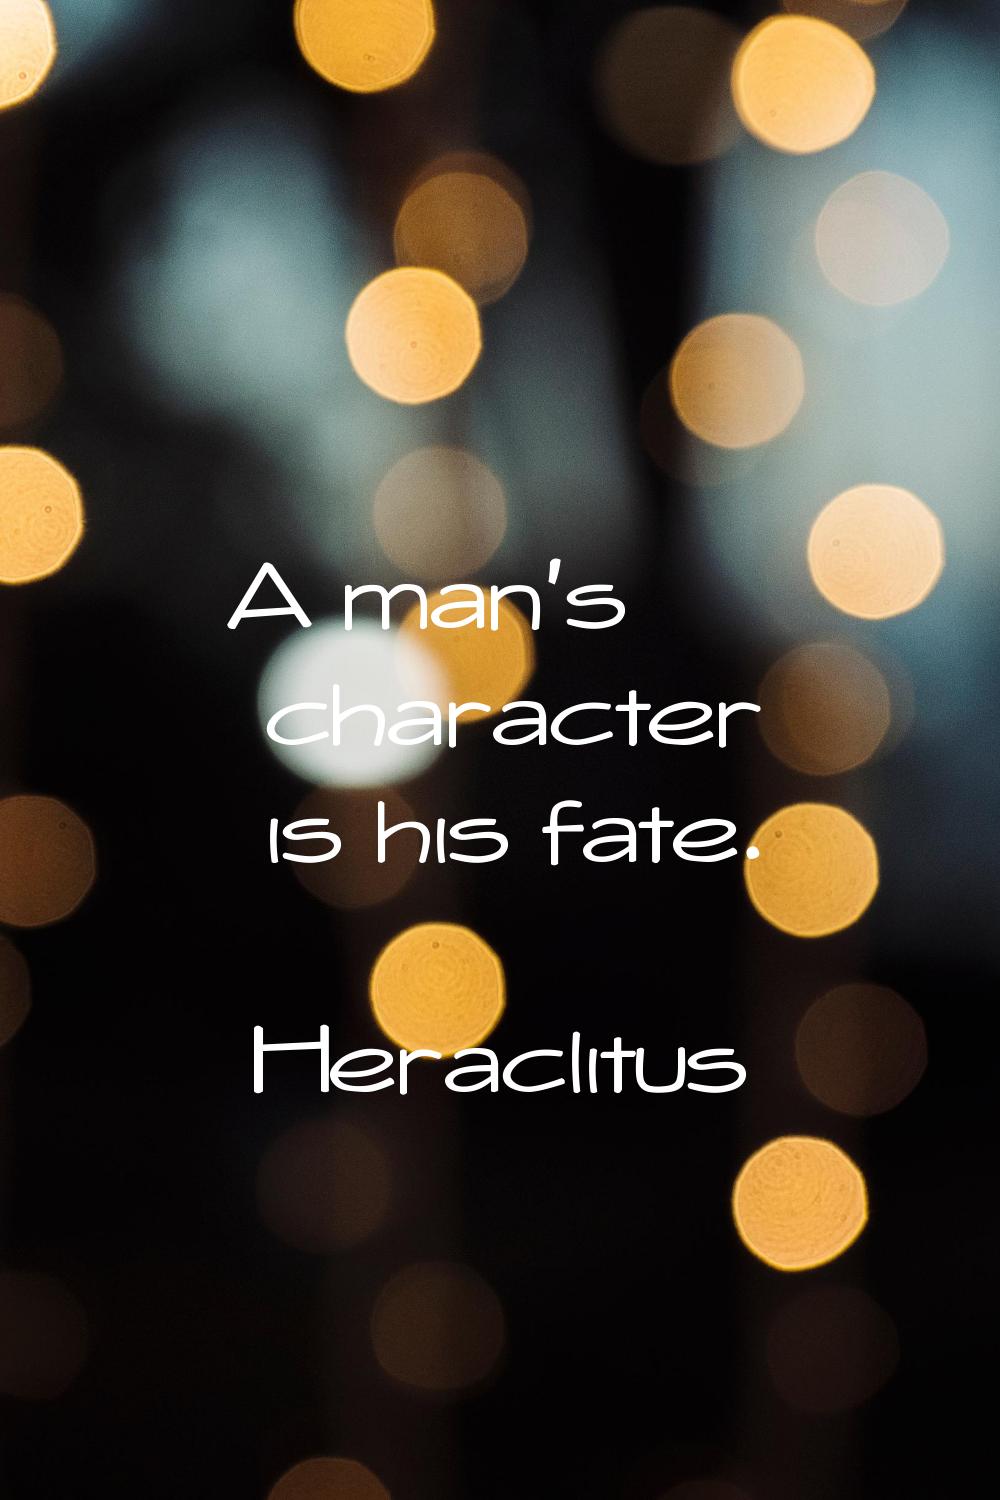 A man's character is his fate.